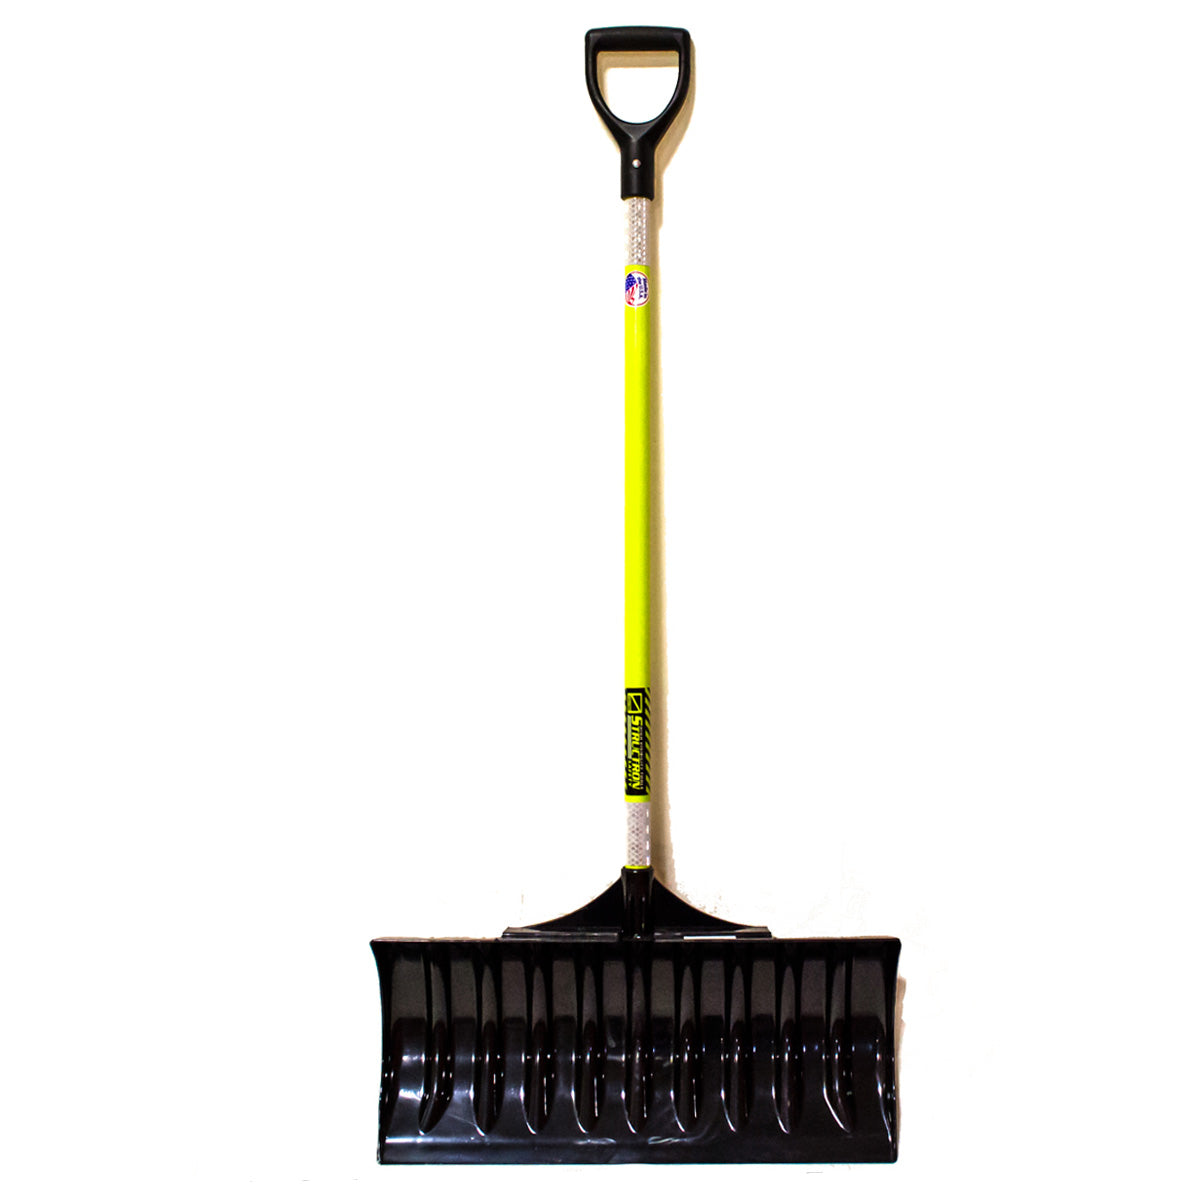 Seymour 96858 Structron 24 In. Snow Pusher Shovel